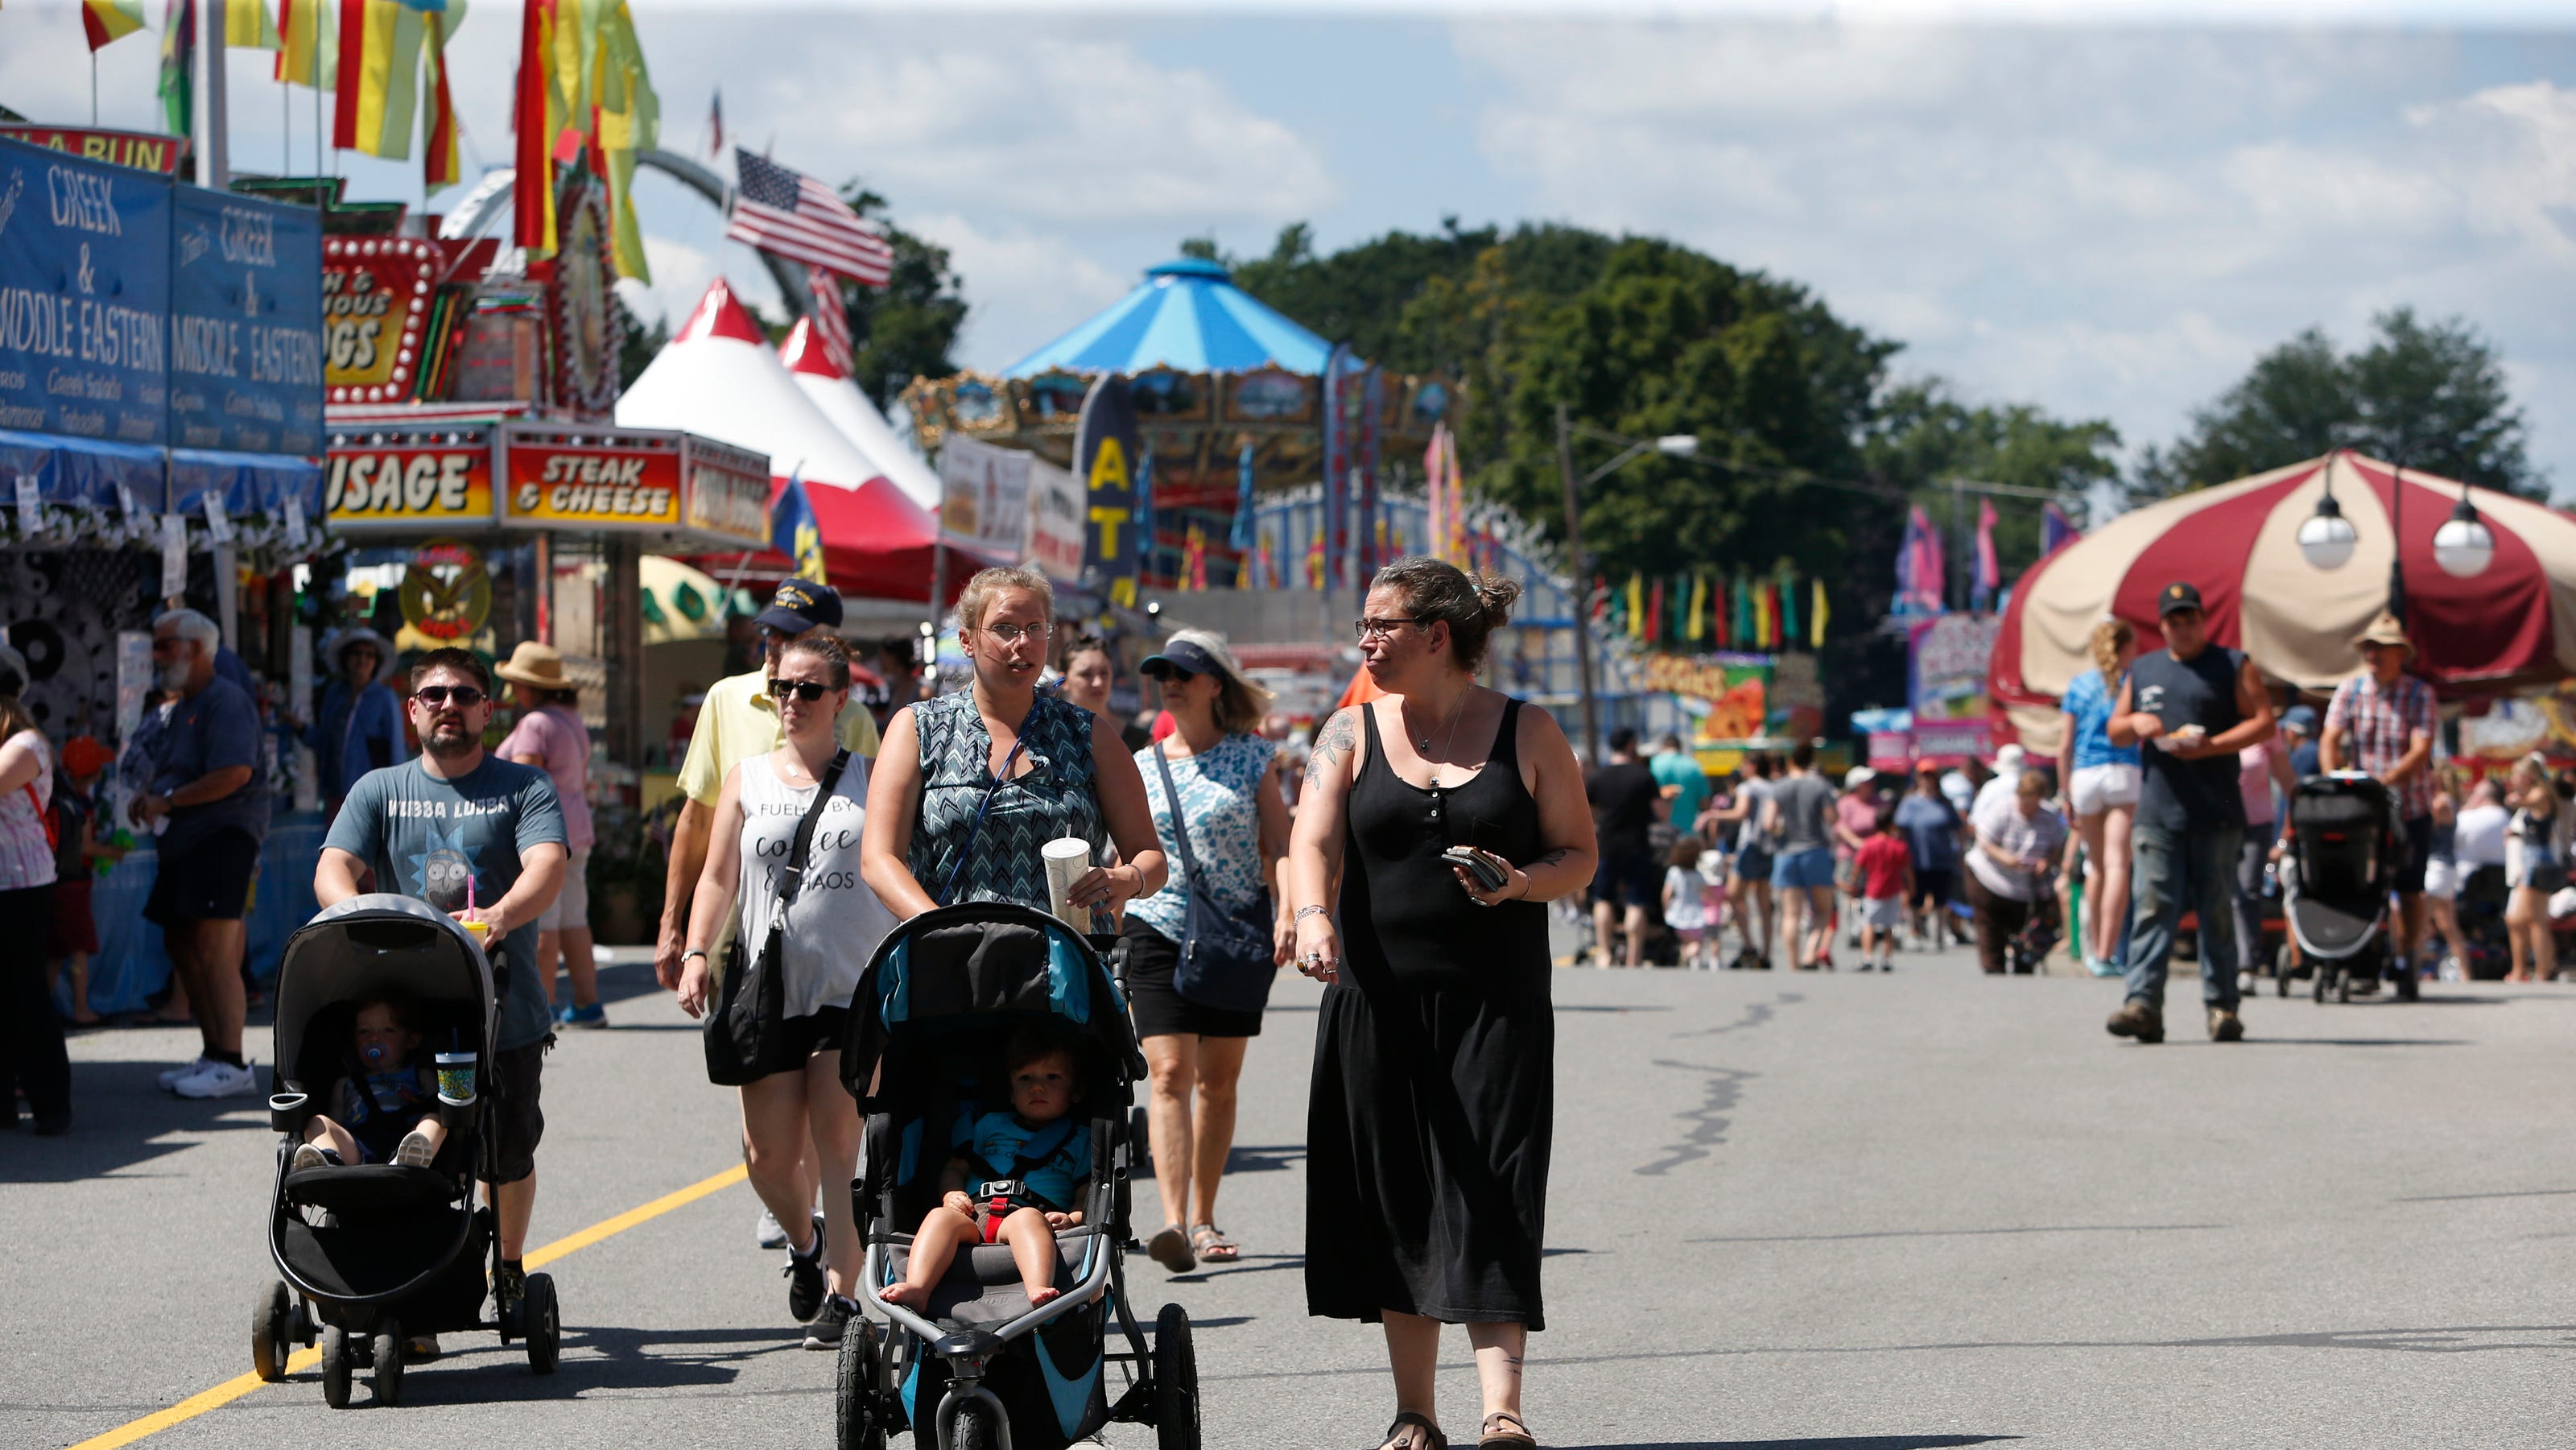 Dutchess County Fair reopening faces questions for NY guidelines